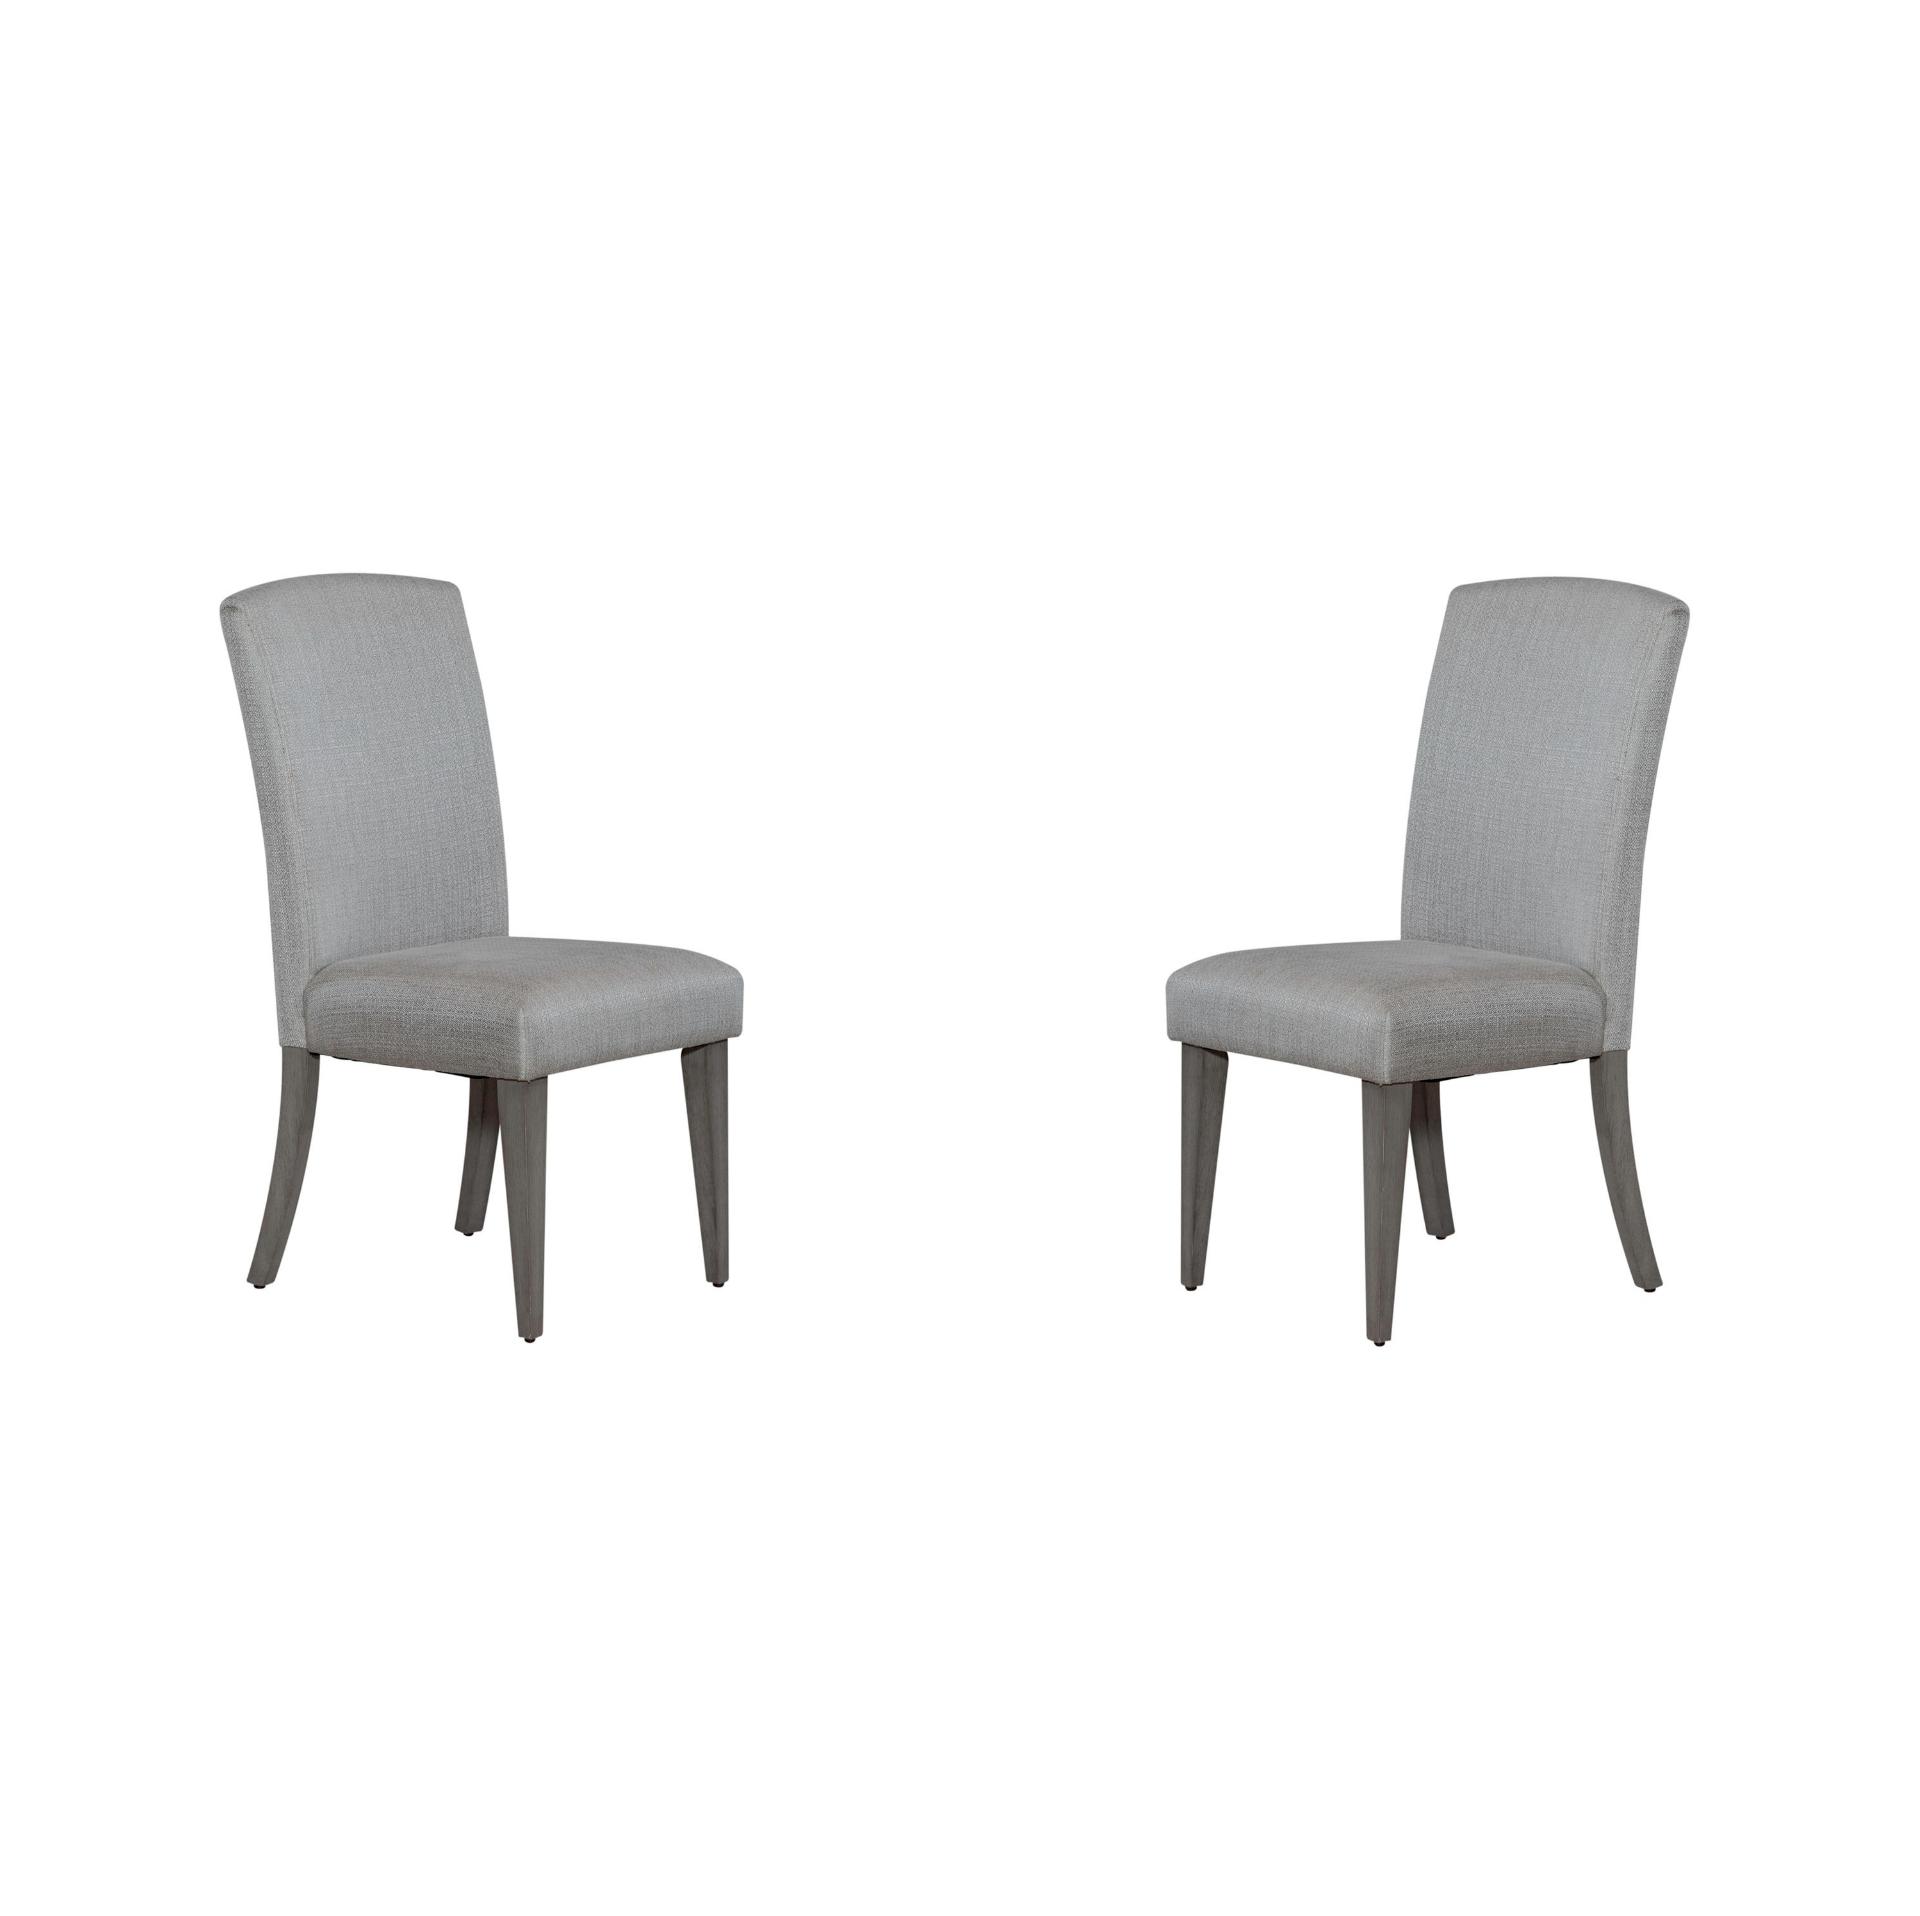 Contemporary Side Chair Set Palmetto Heights (499-DR) 499-C6501S-Set-2 in Gray Linen